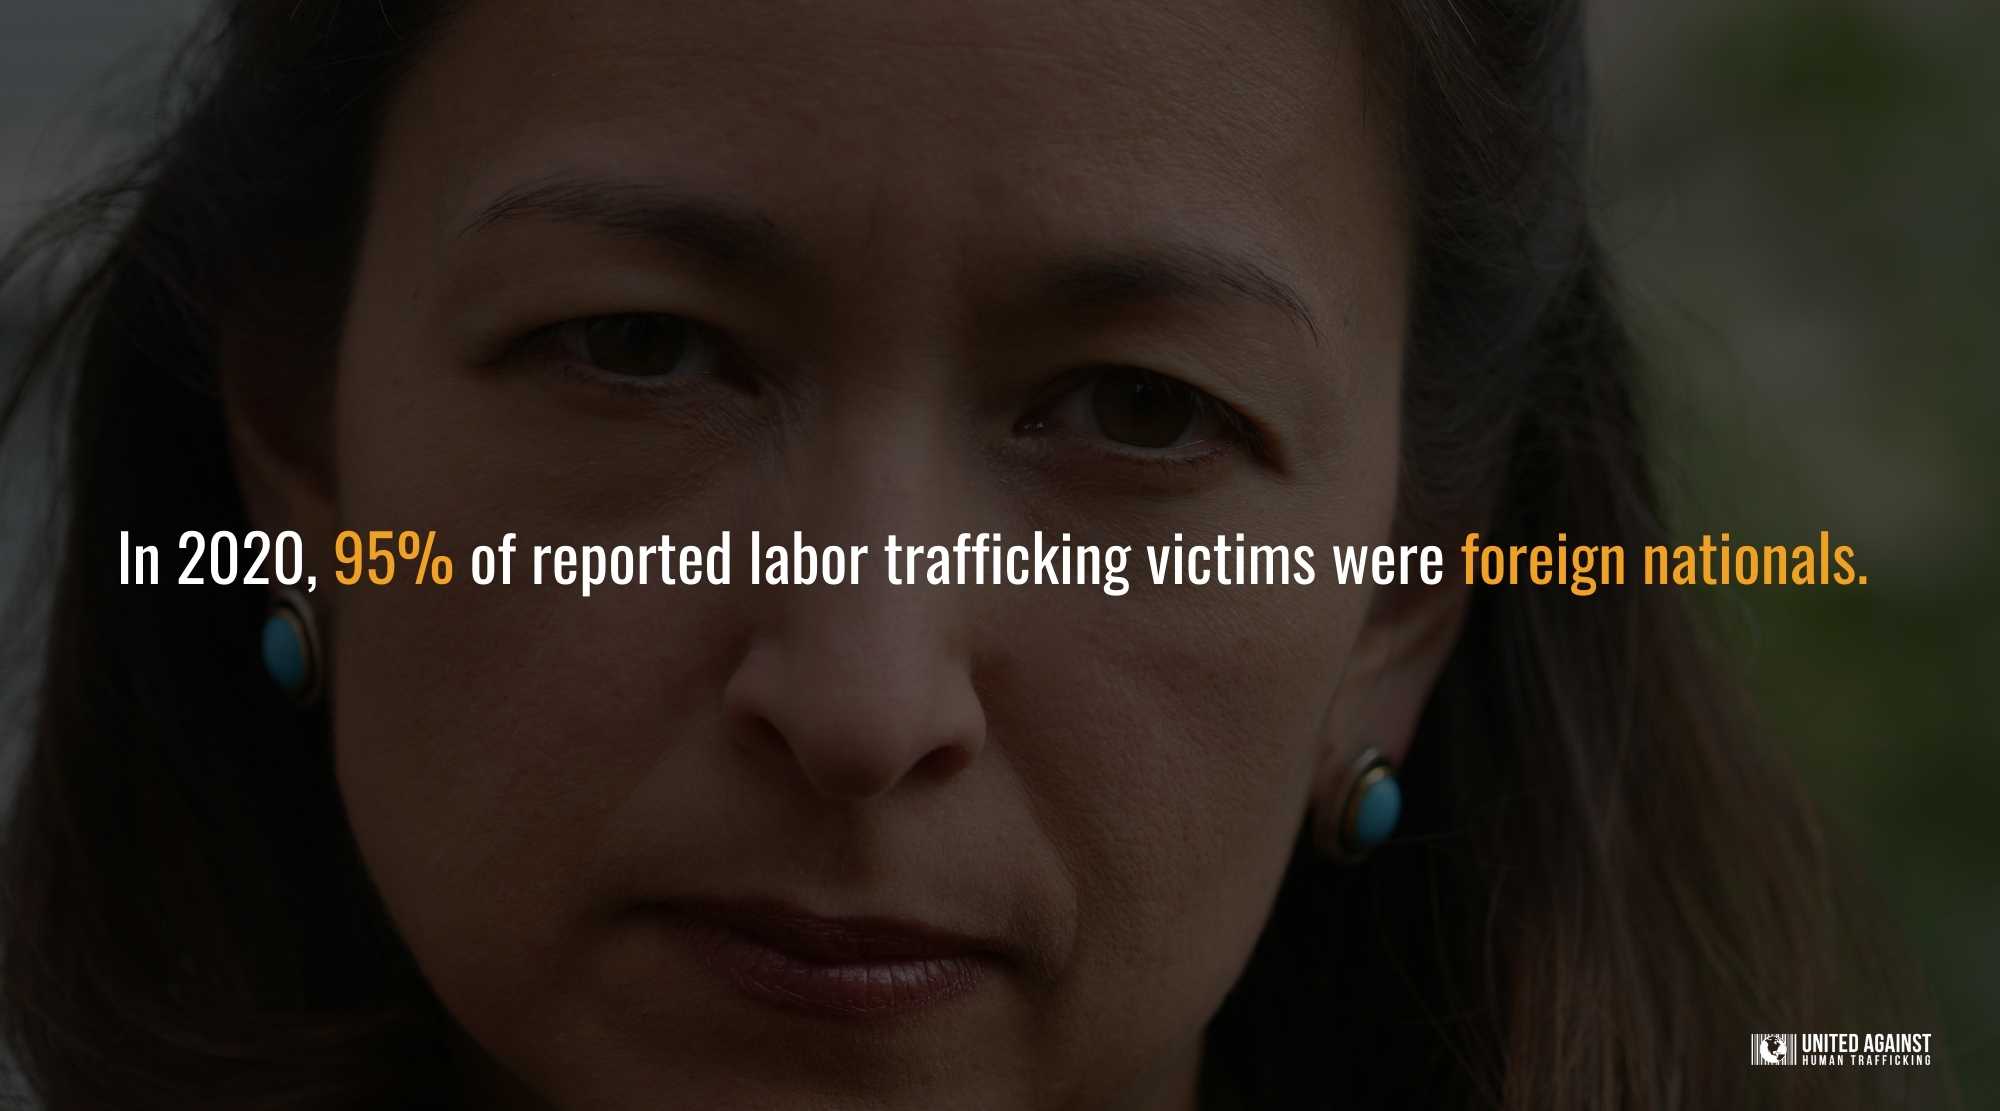 95% of reported labor trafficking victims were foreign nationals